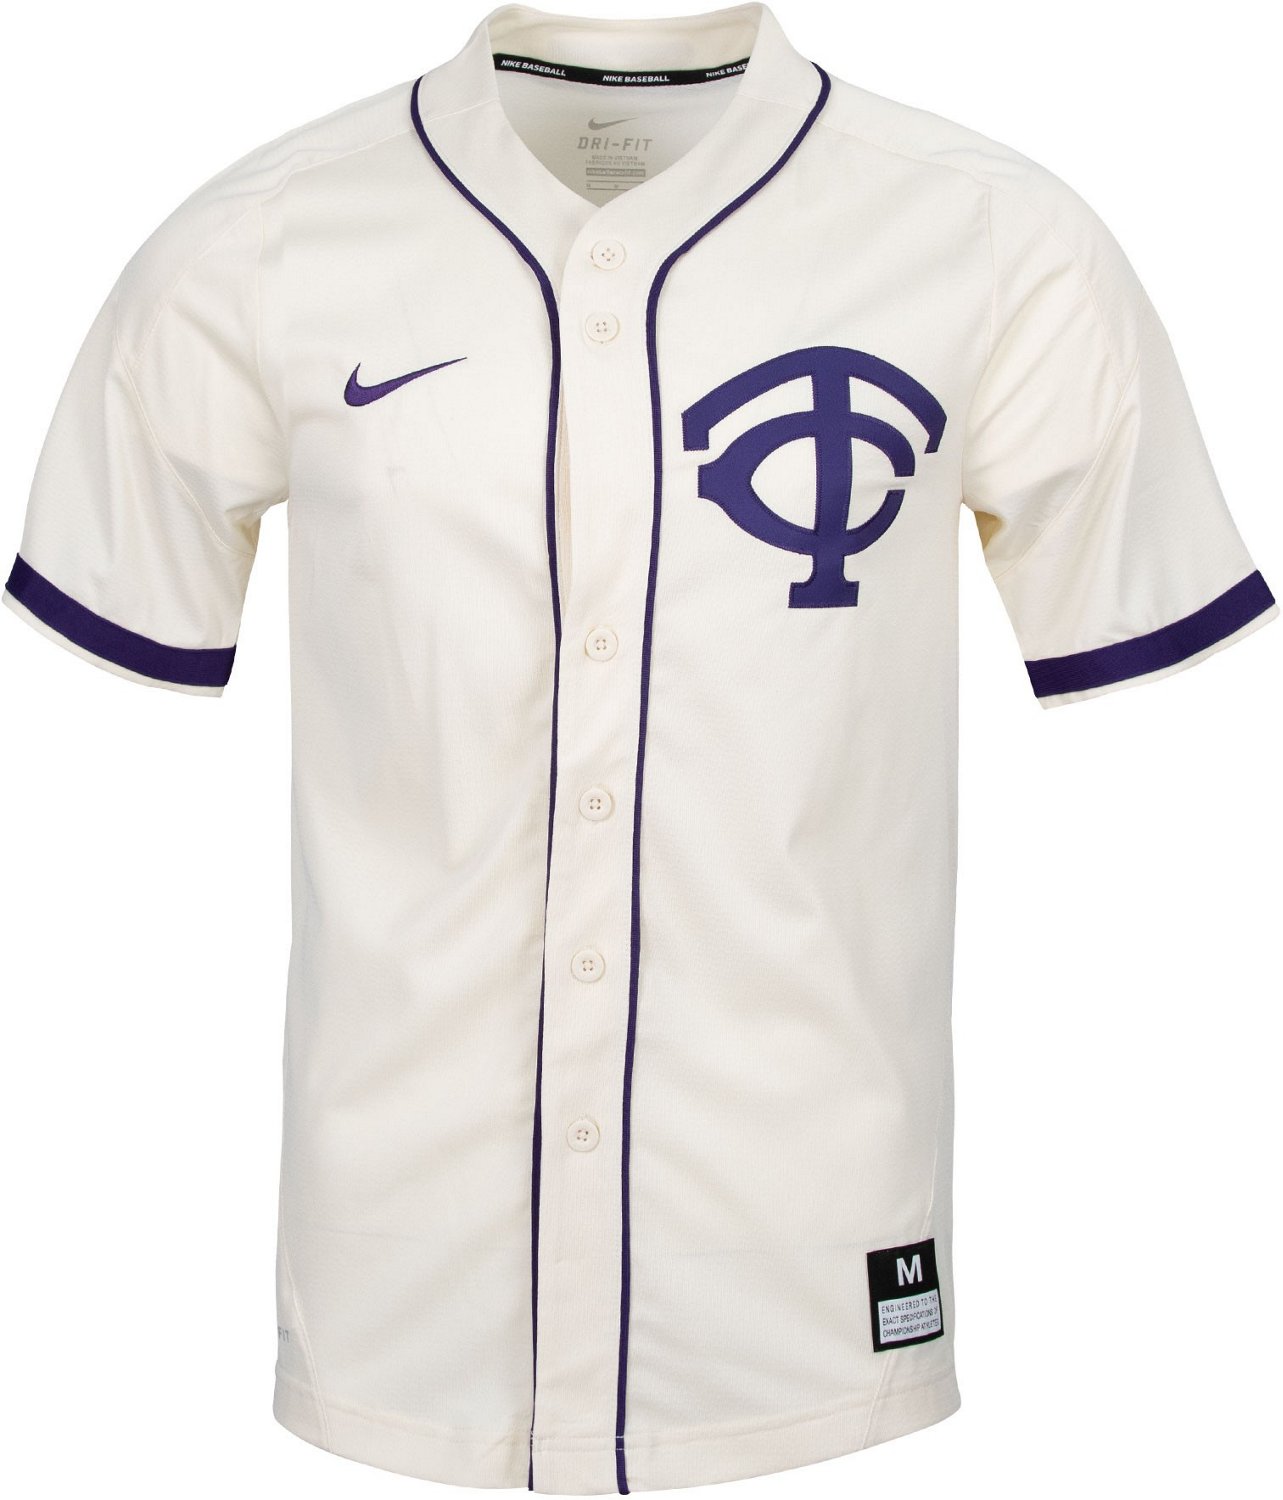  Colorado Rockies Boy's Cool Base Pro Style Replica Game Jersey  : Sports & Outdoors